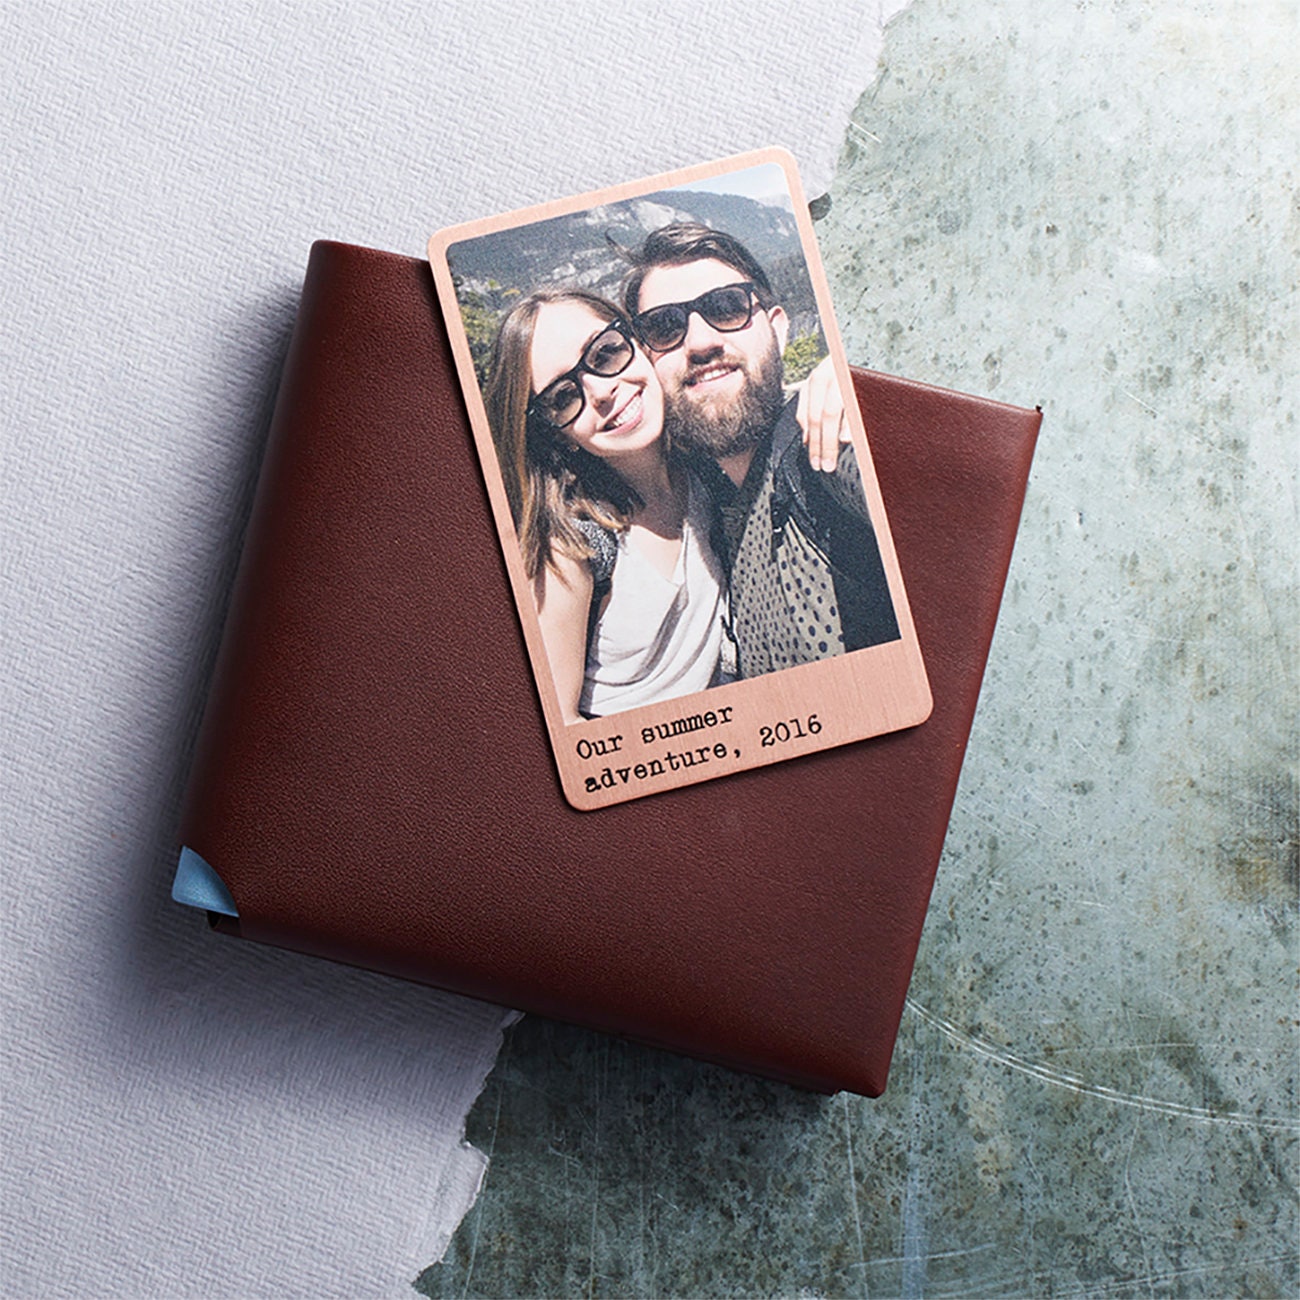 14. Personalized Solid Copper Wallet Photo Card